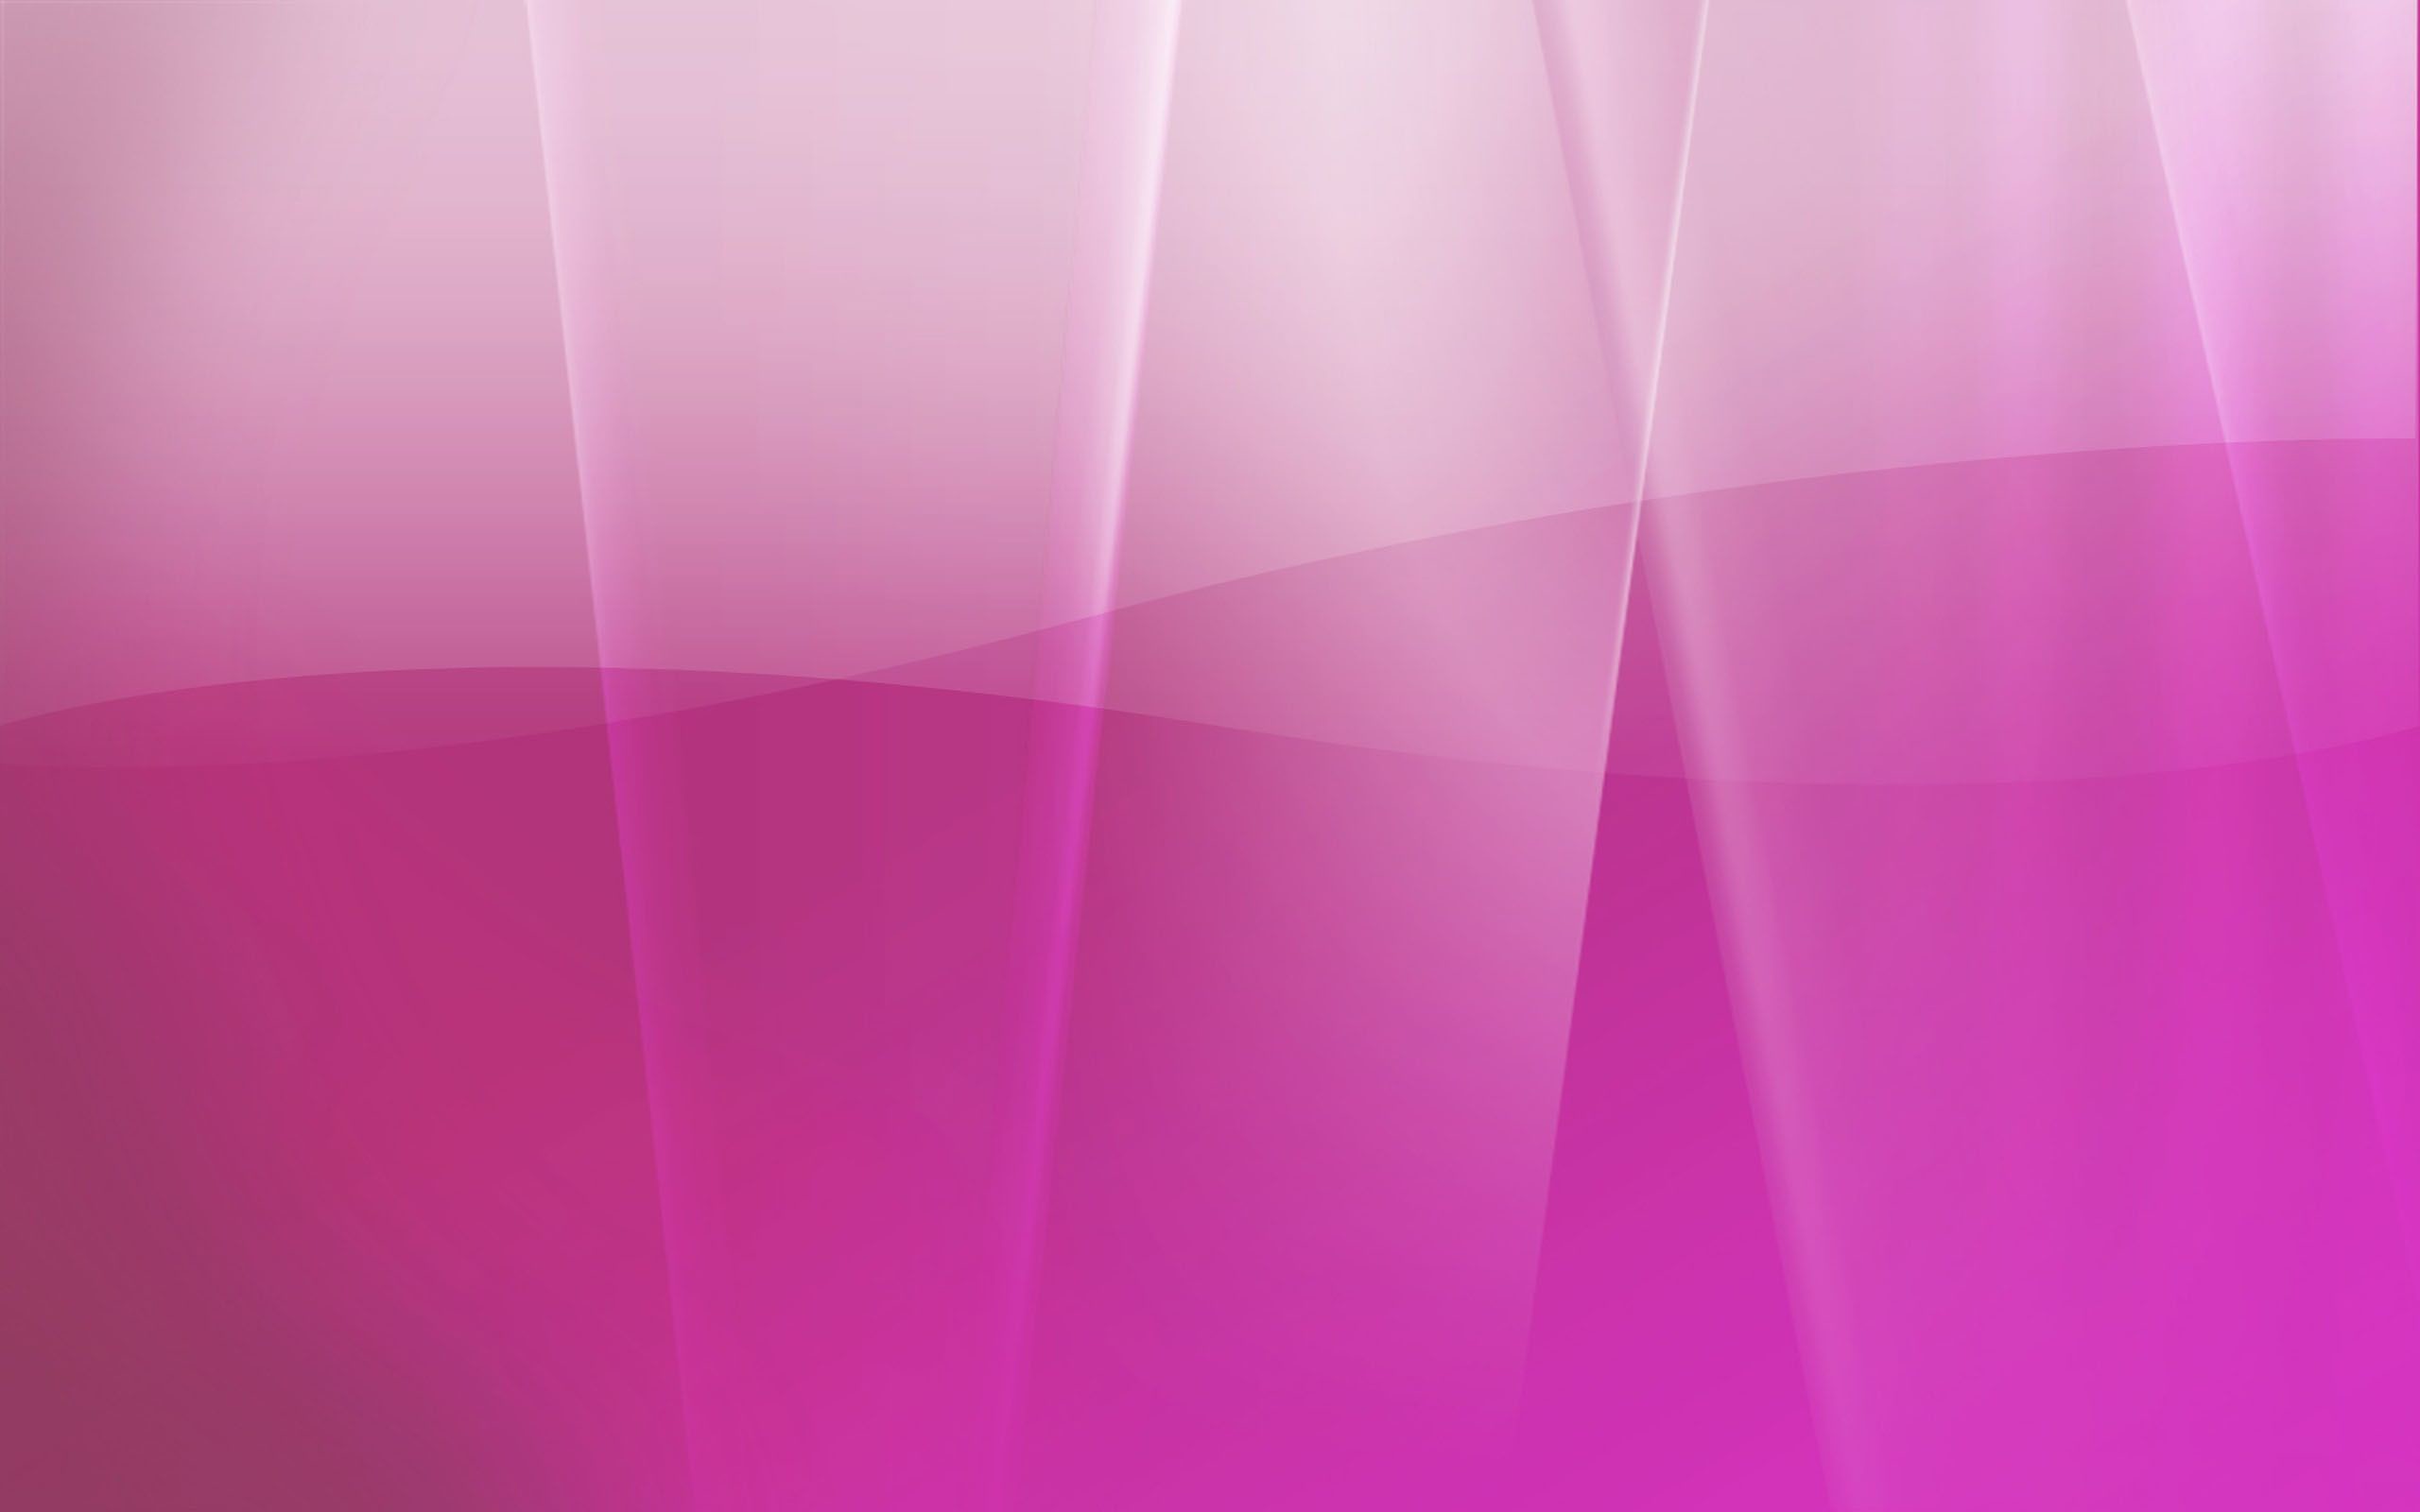 2560x1600 Solid Pink Backgrounds, wallpaper, Solid Pink Backgrounds hd .